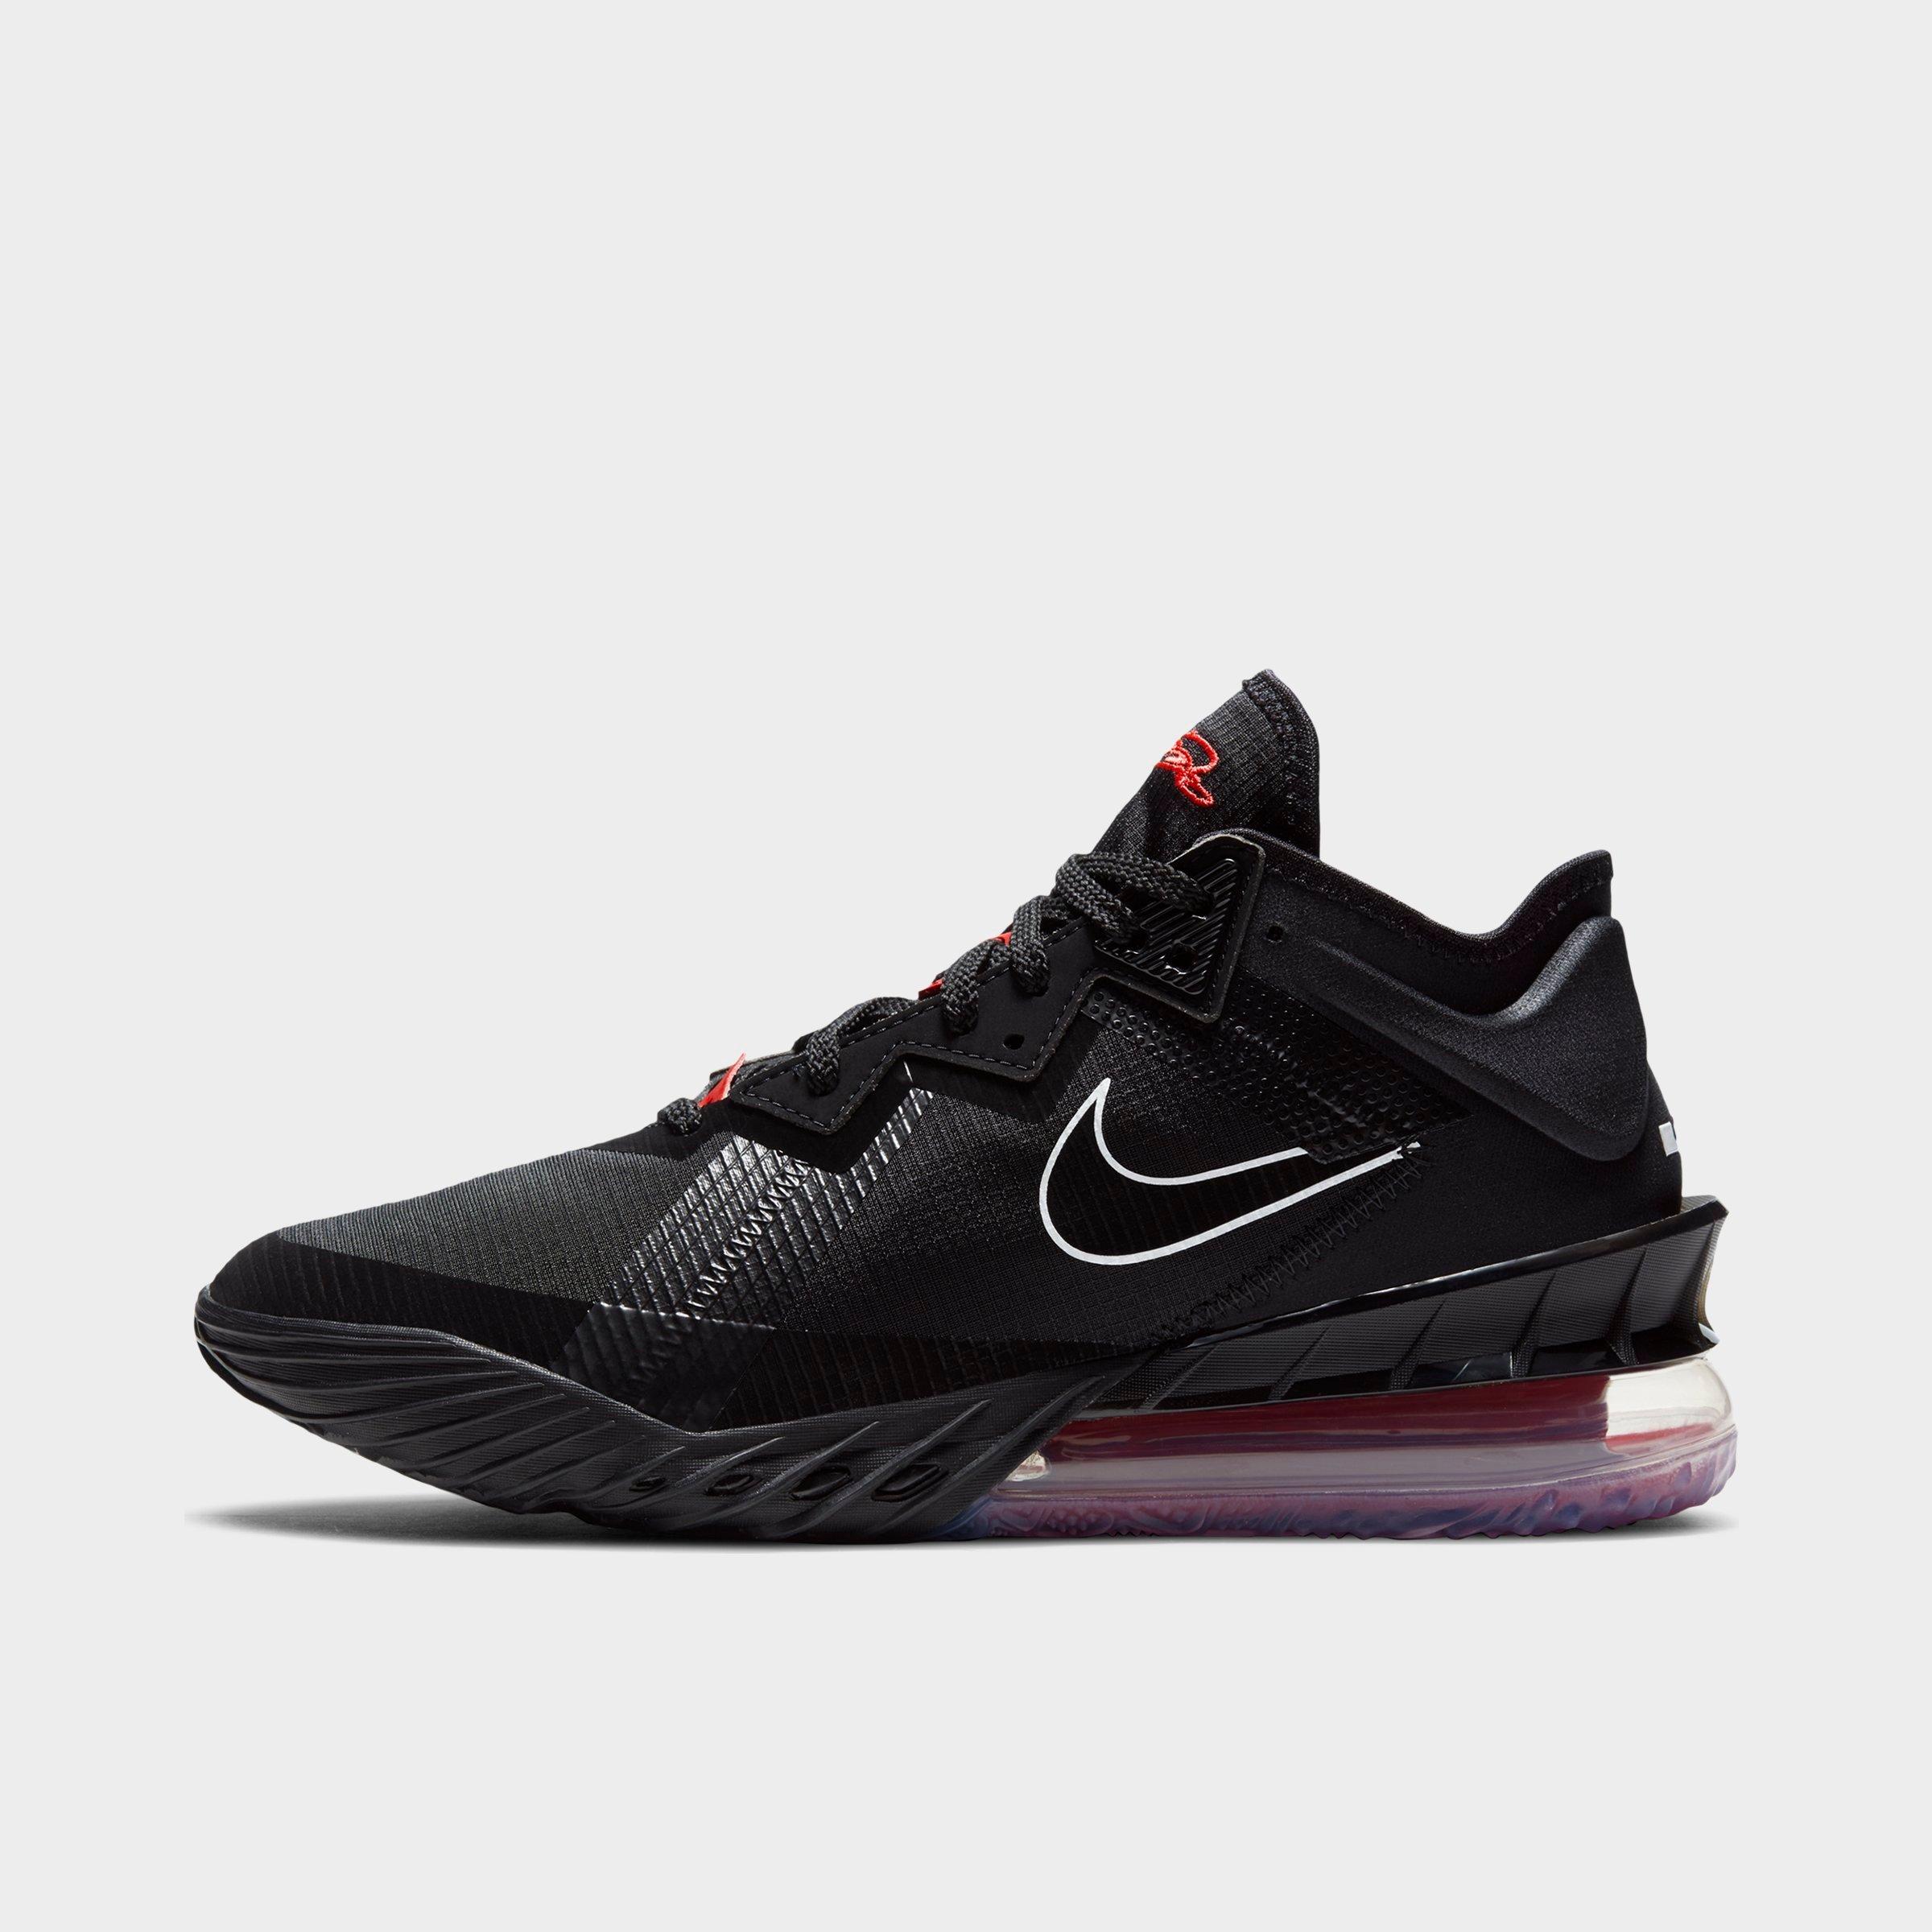 Nike Lebron 18 Low Basketball Shoes In Black/white/university Red